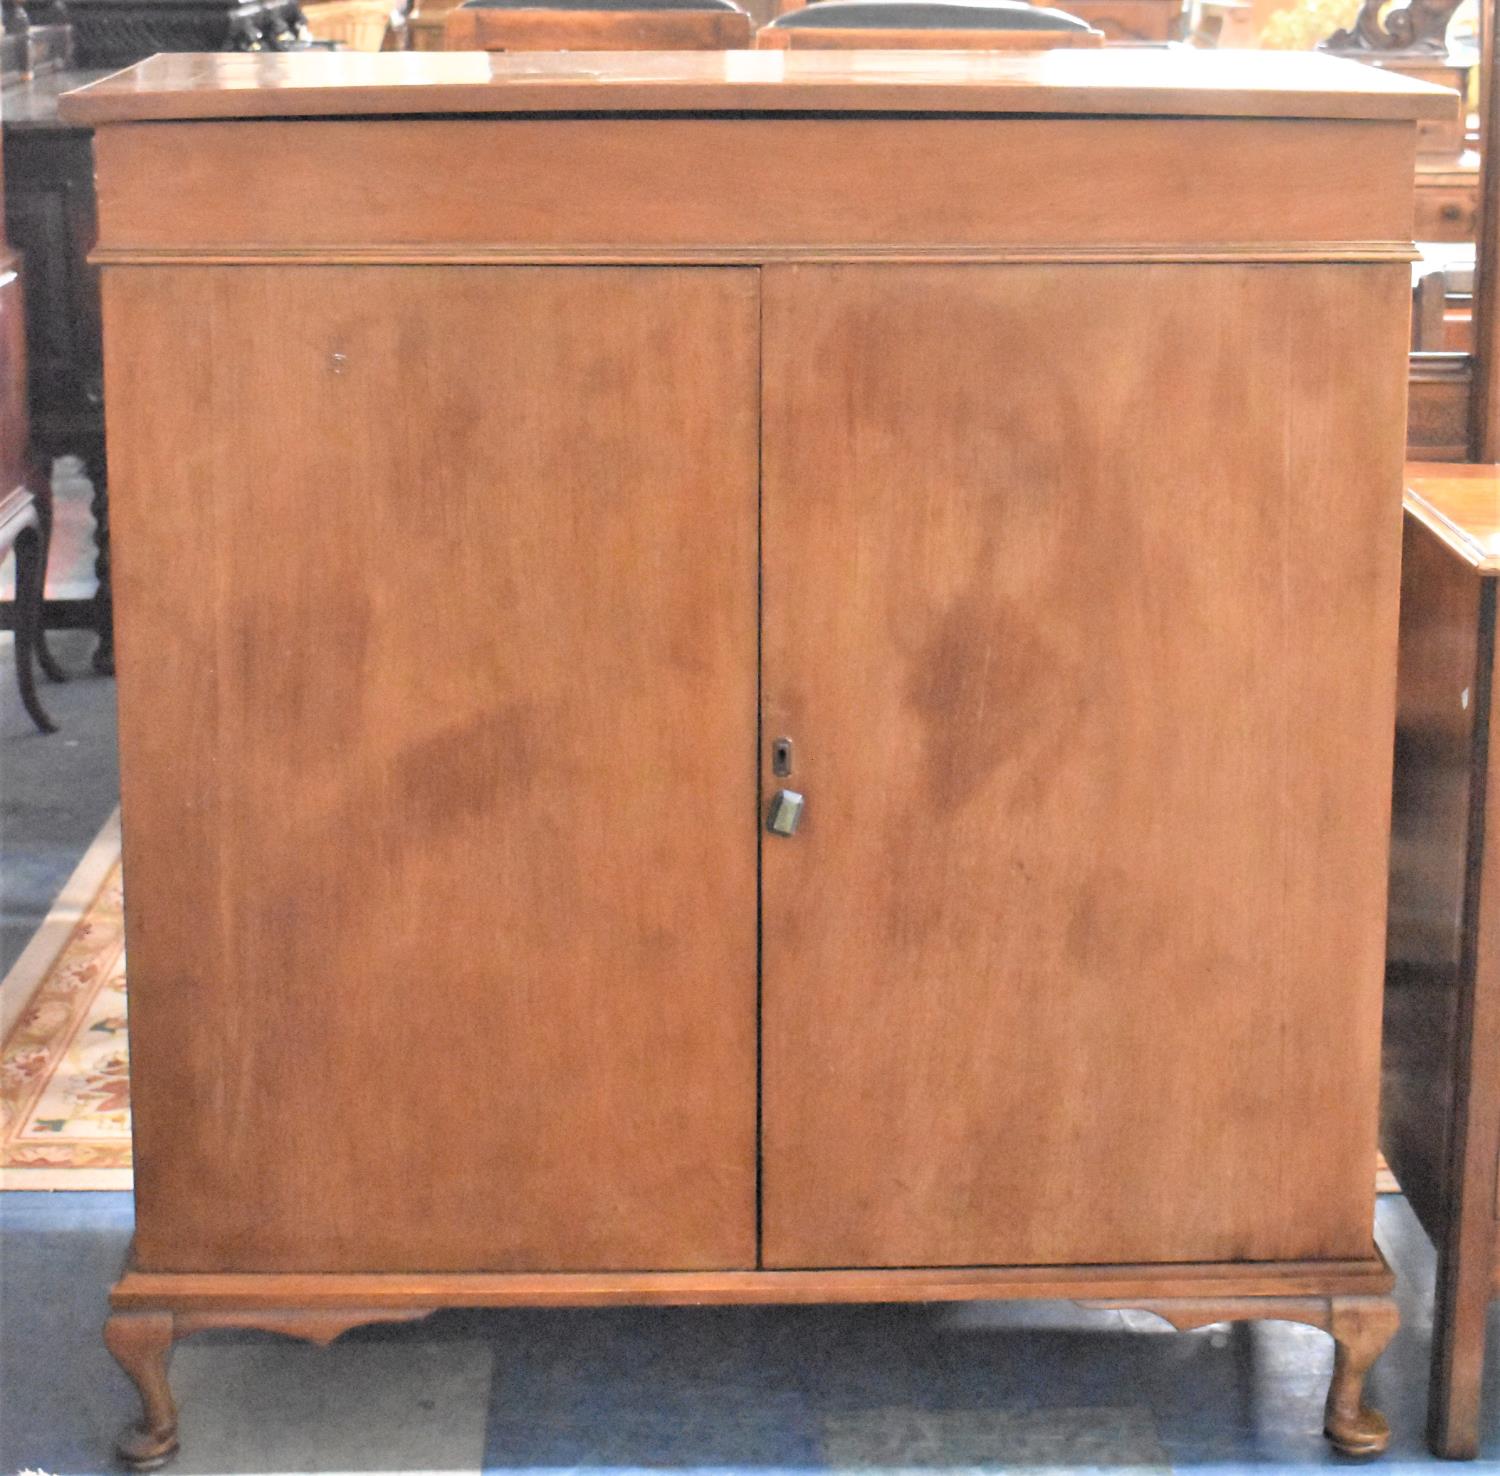 An Edwardian Mahogany Gentleman's Fitted Bedroom Cabinet with Hinged Lid to Interior for Socks,